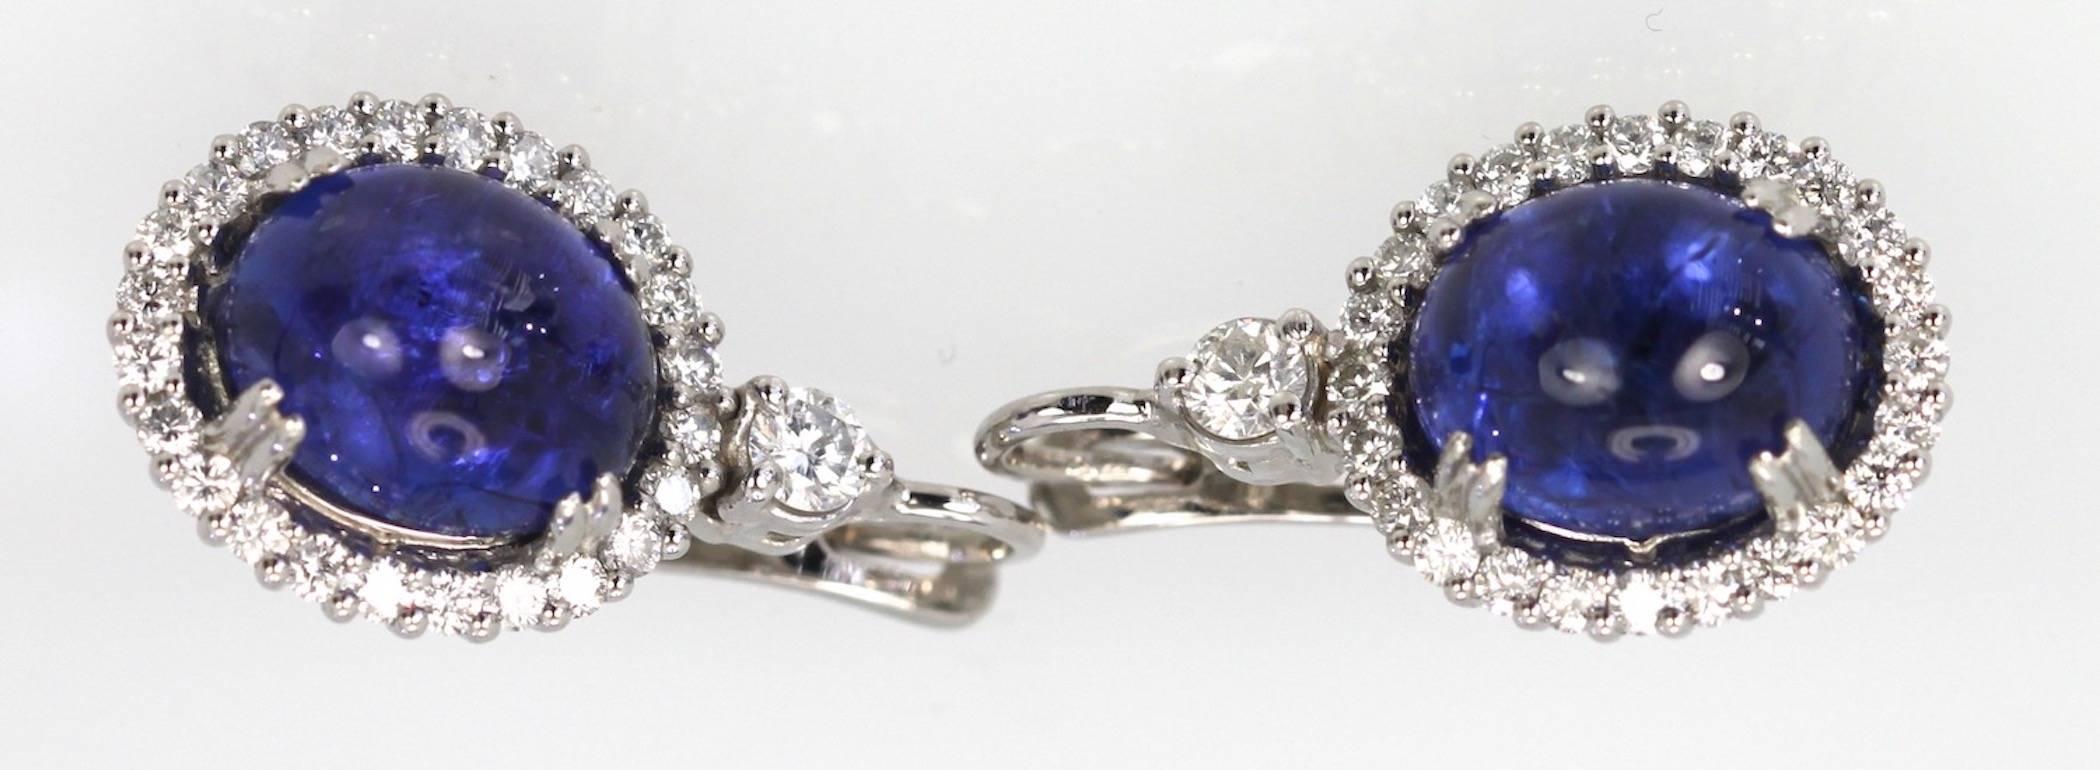 These Tanzanite Cabochon Diamond Earrings I love.  They match the Tanzanite Pendant and Ring listed and they are a gorgeous shade of Blue with nice matrix of violet.  They reflect light and have amazing sparkle. The color is fantastic and the